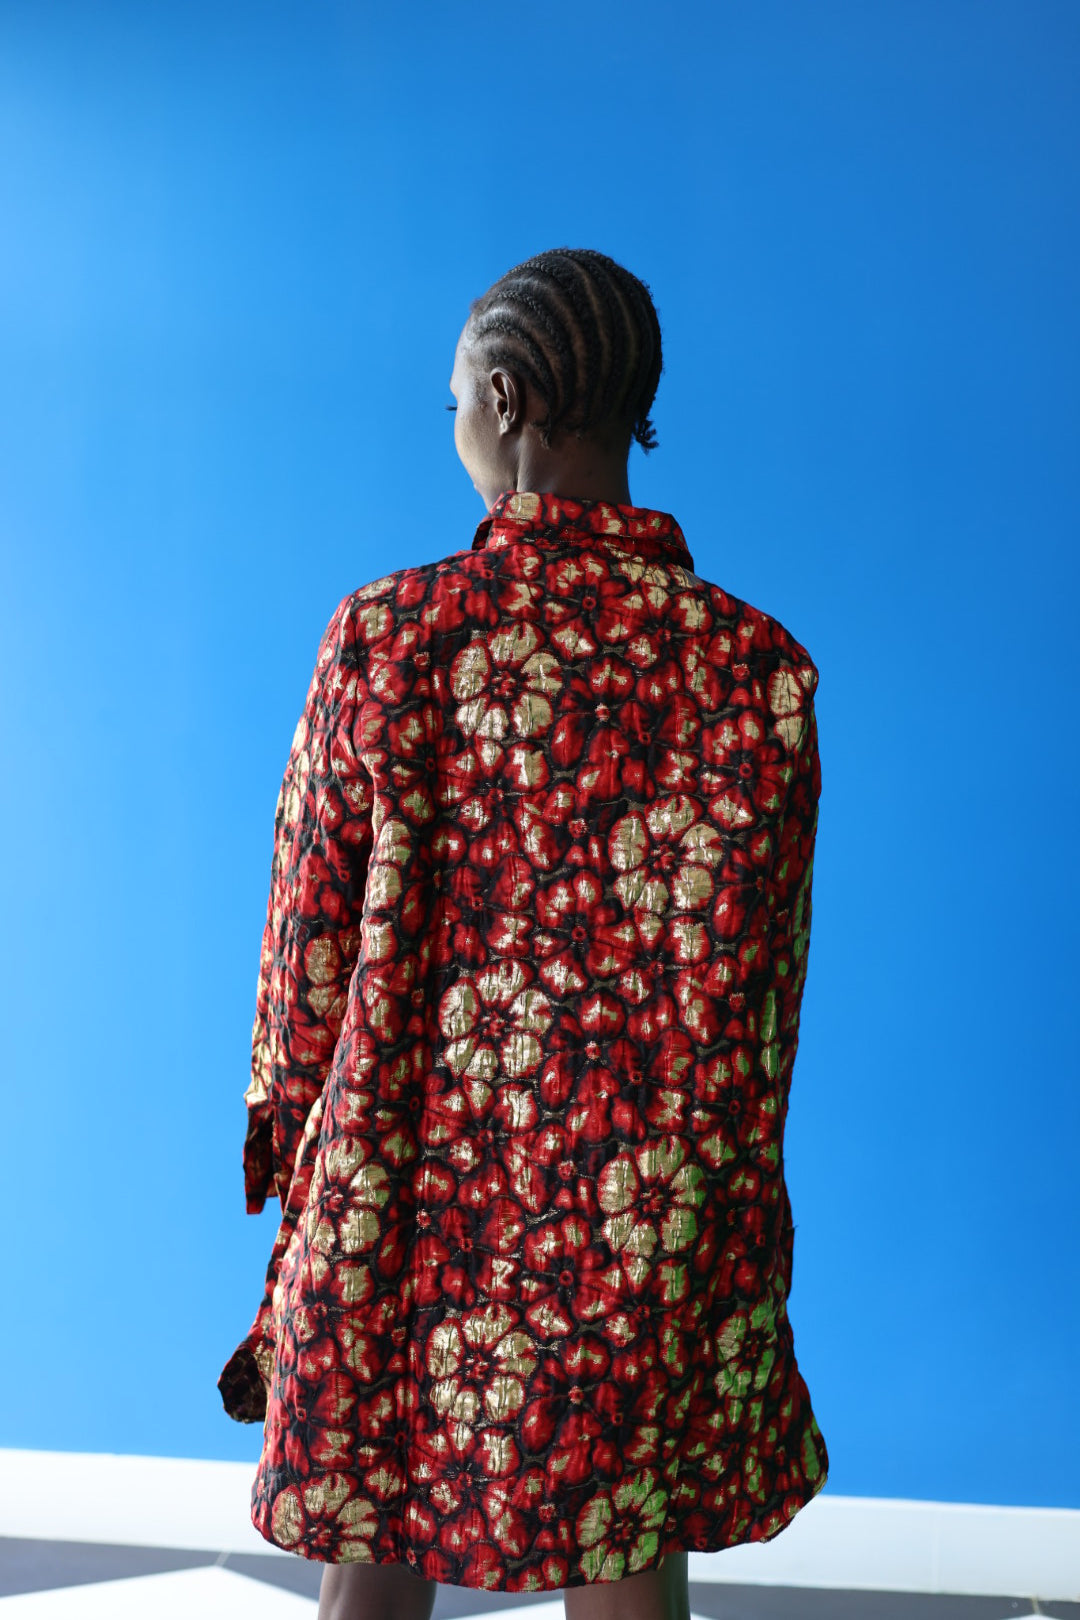 The Ophelia Button Top features red flowers with splashes of gold against a black background. She looks just as good from the back as she does from the front.